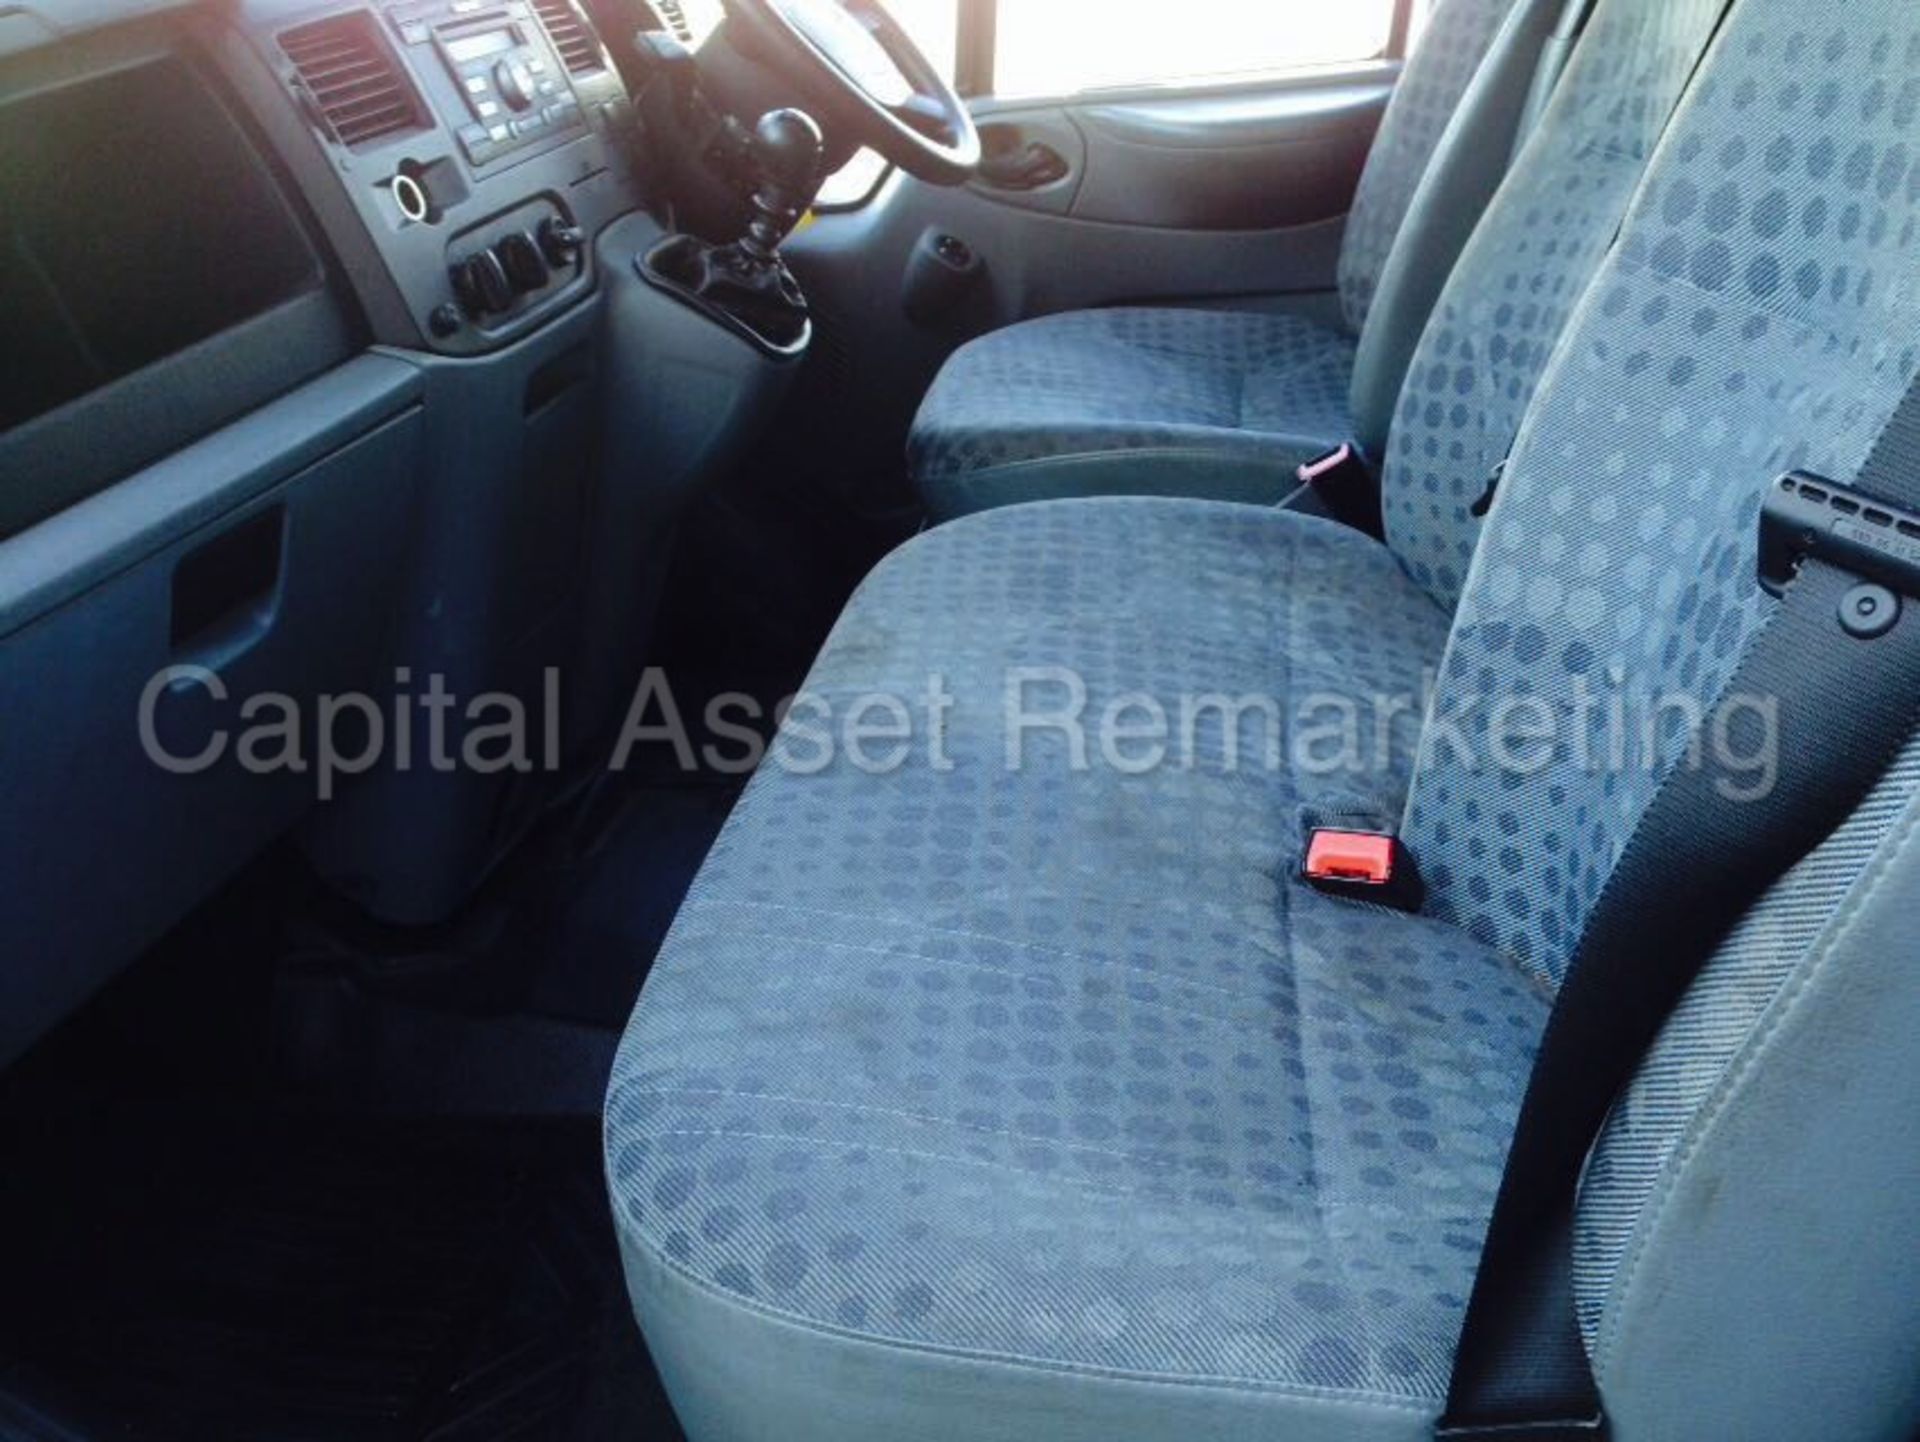 FORD TRANSIT 100 T280 FWD 'SWB HI-ROOF' (2014 MODEL) '2.2 TDCI - 100 PS - 6 SPEED' **AIR CON** - Image 11 of 21